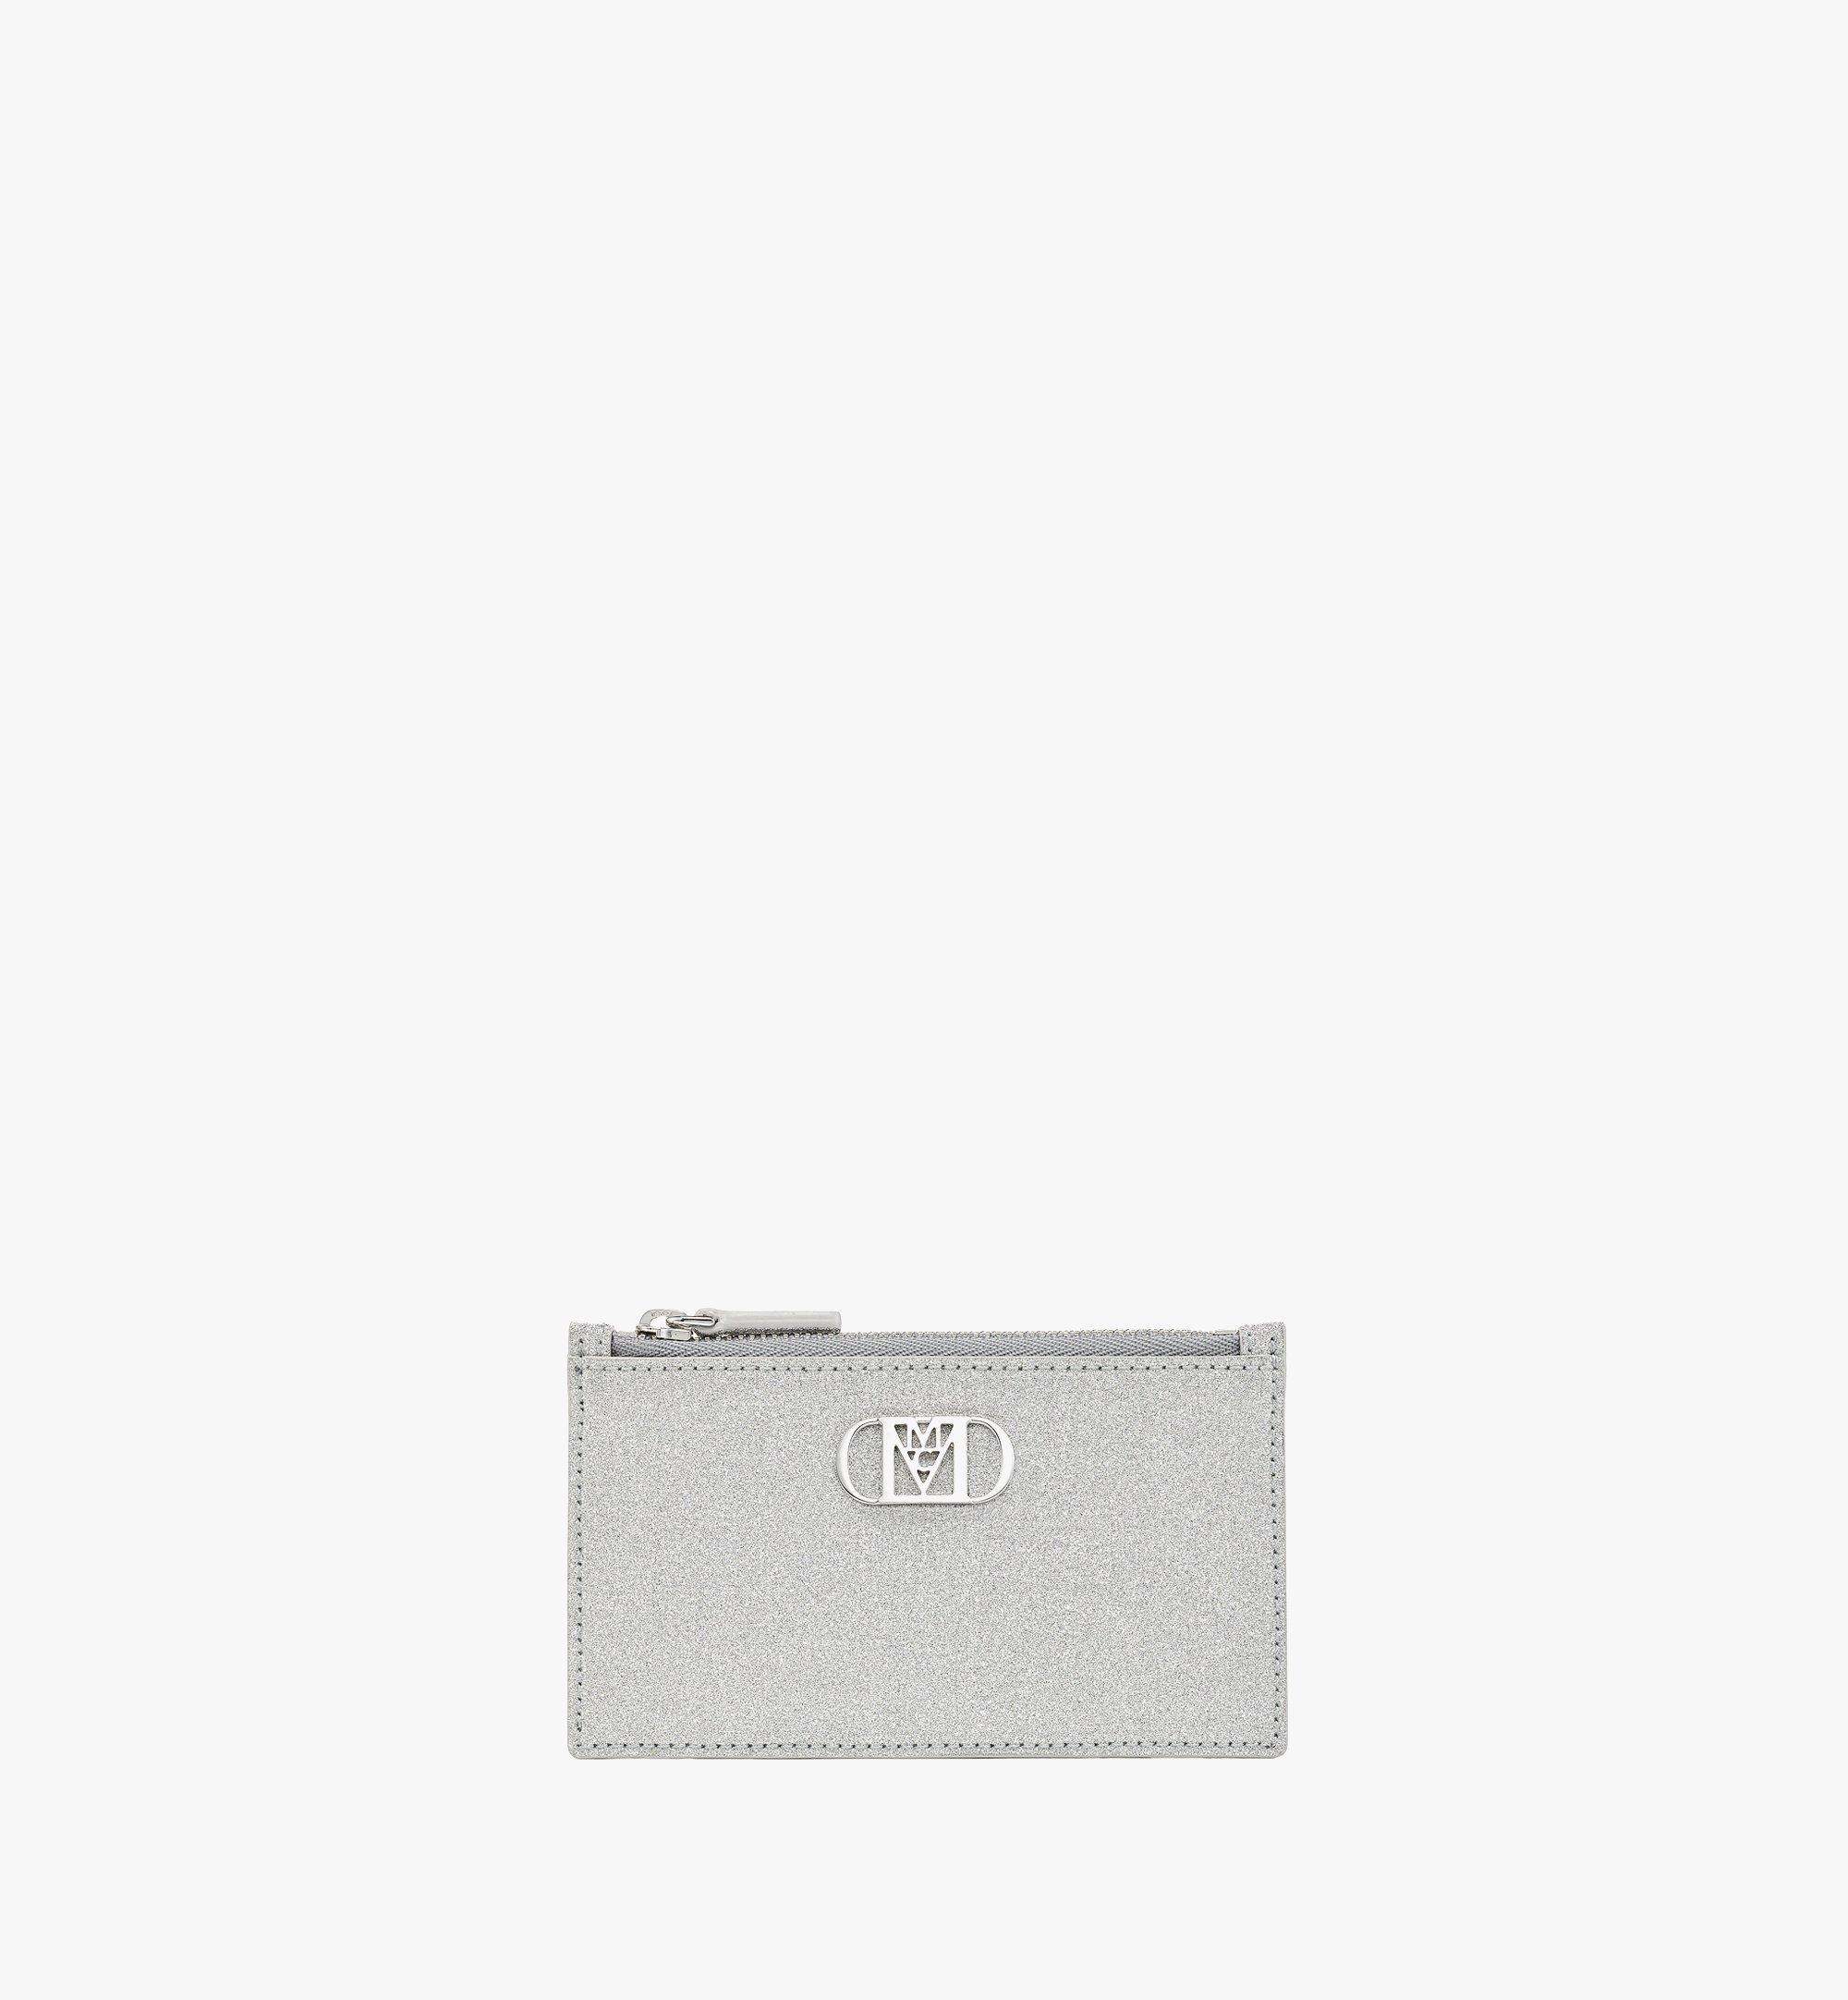 MCM Mode Travia Zip Card Case in Glitter Leather Silver MYADALD03SV001 Alternate View 1